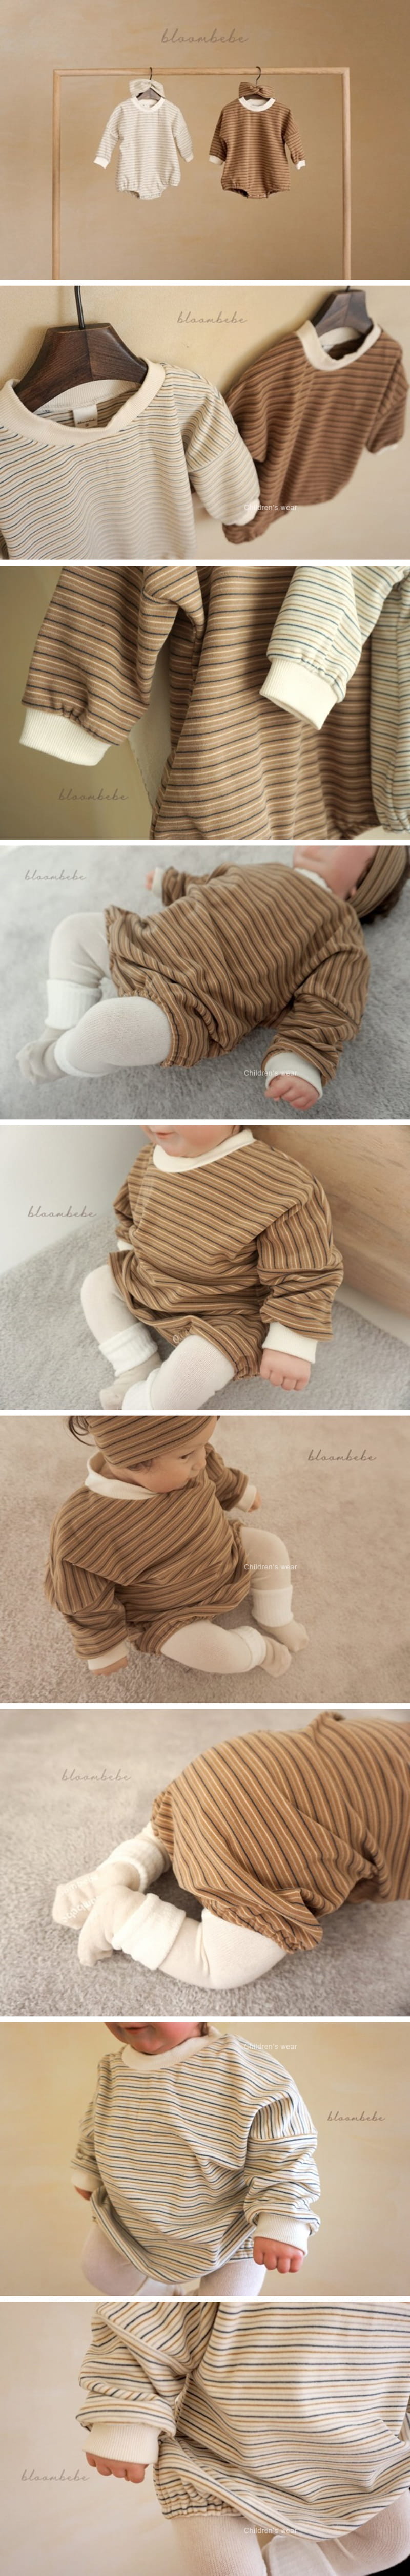 Bloombebe - Korean Baby Fashion - #babyboutique - Boodle ST Body Suit